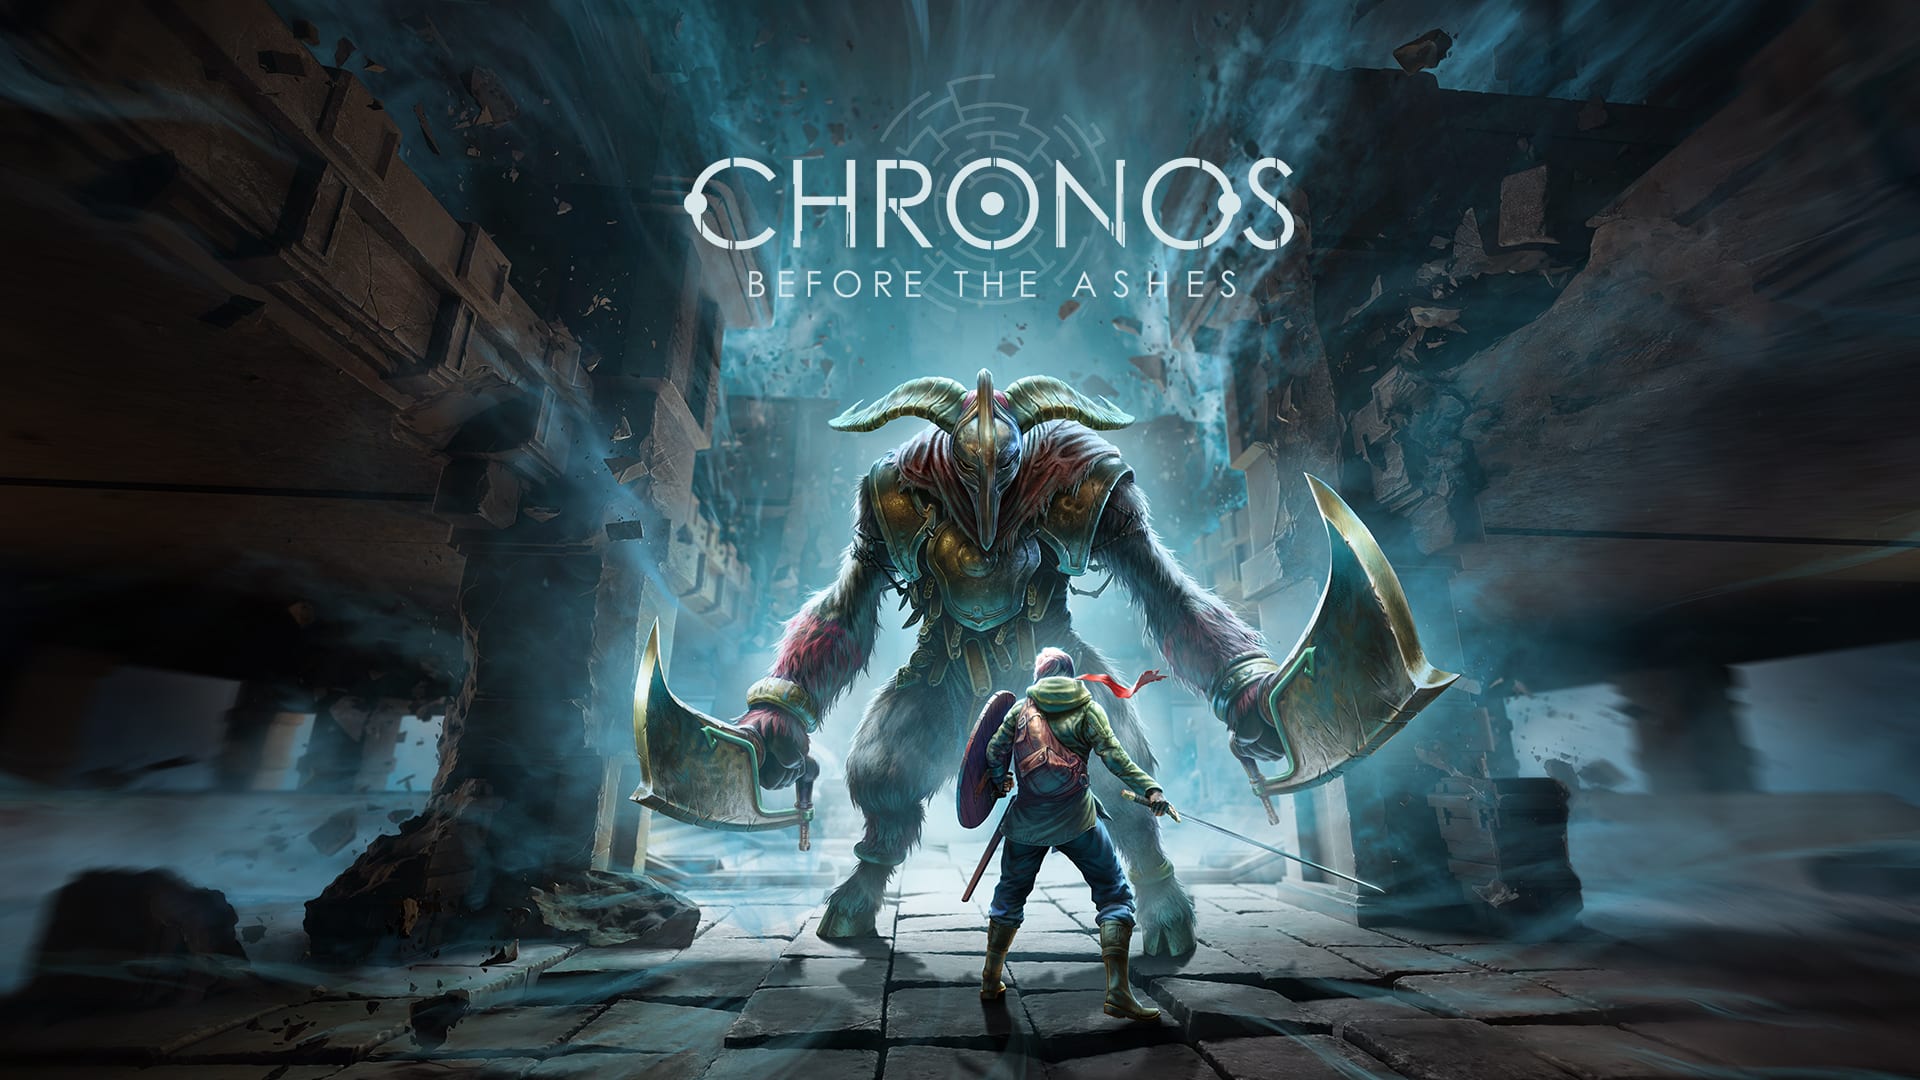 Chronos: Before the Ashes